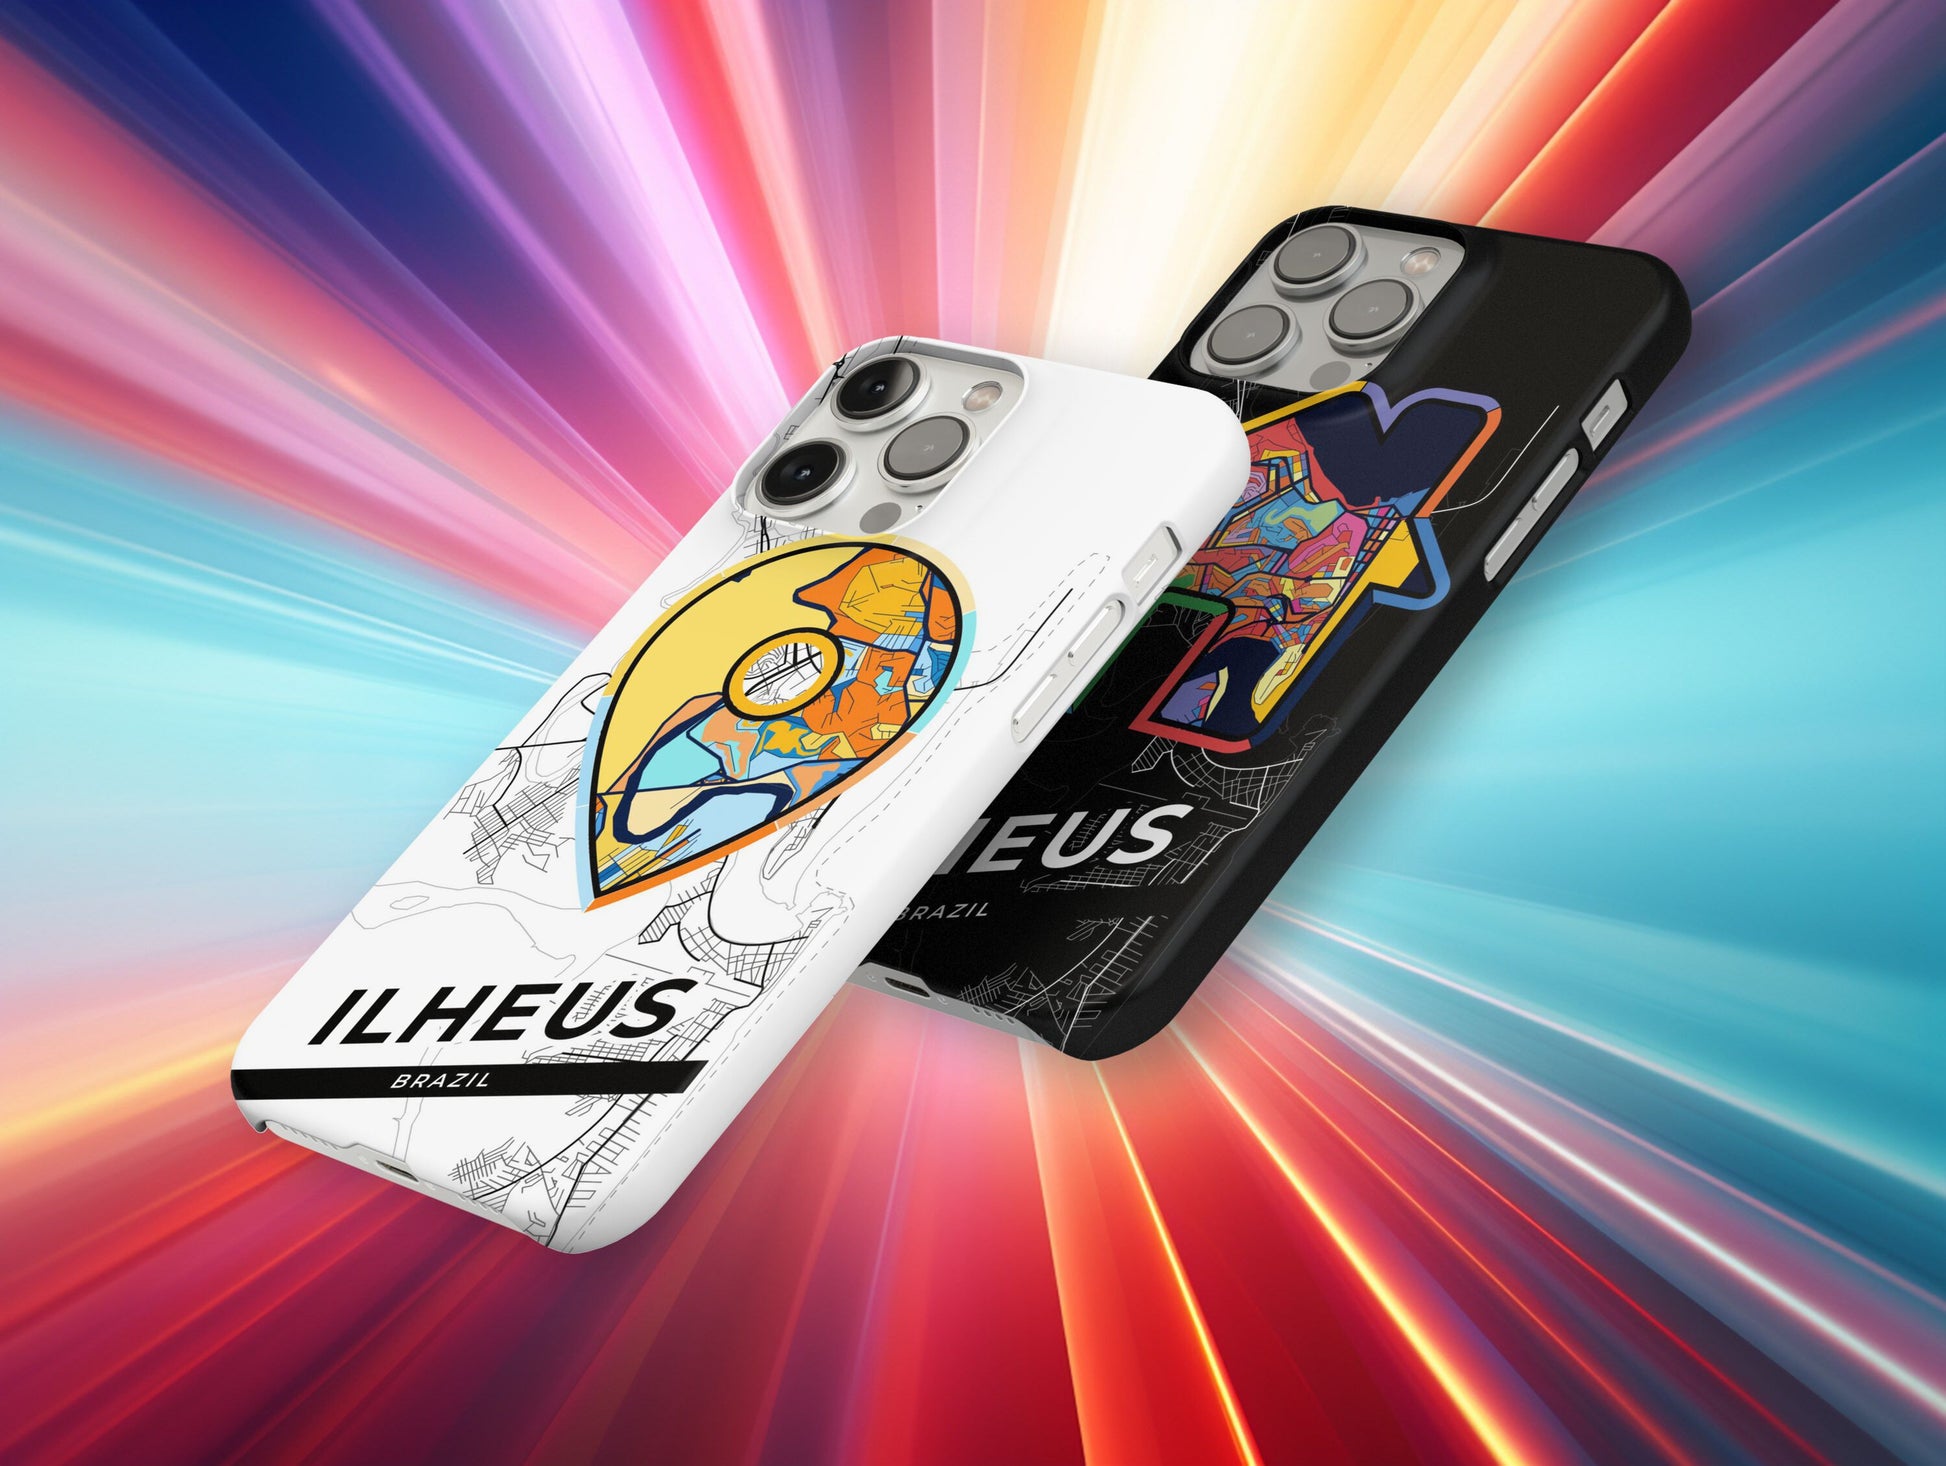 Ilheus Brazil slim phone case with colorful icon. Birthday, wedding or housewarming gift. Couple match cases.